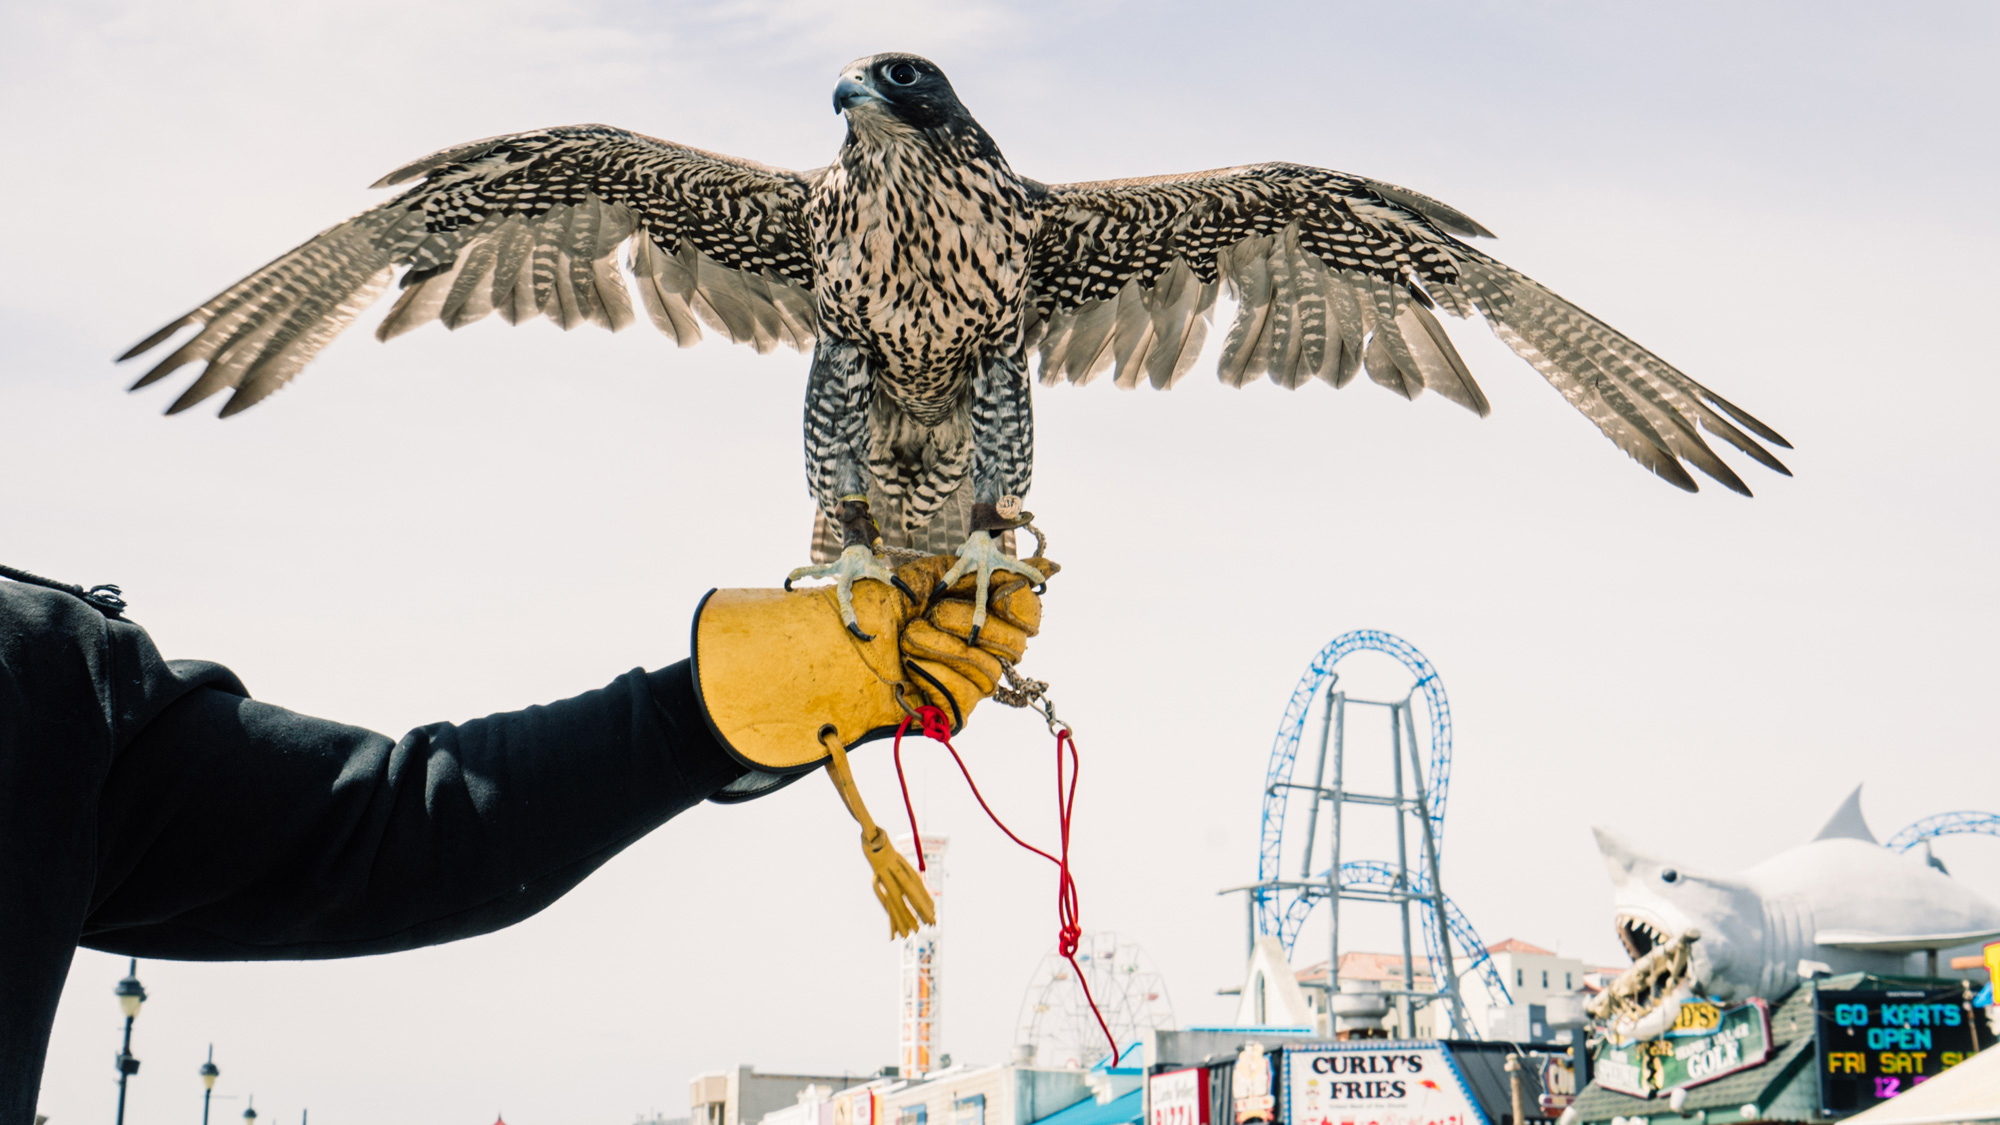 falcon perches on handler's glove, jersey shore attractions in background